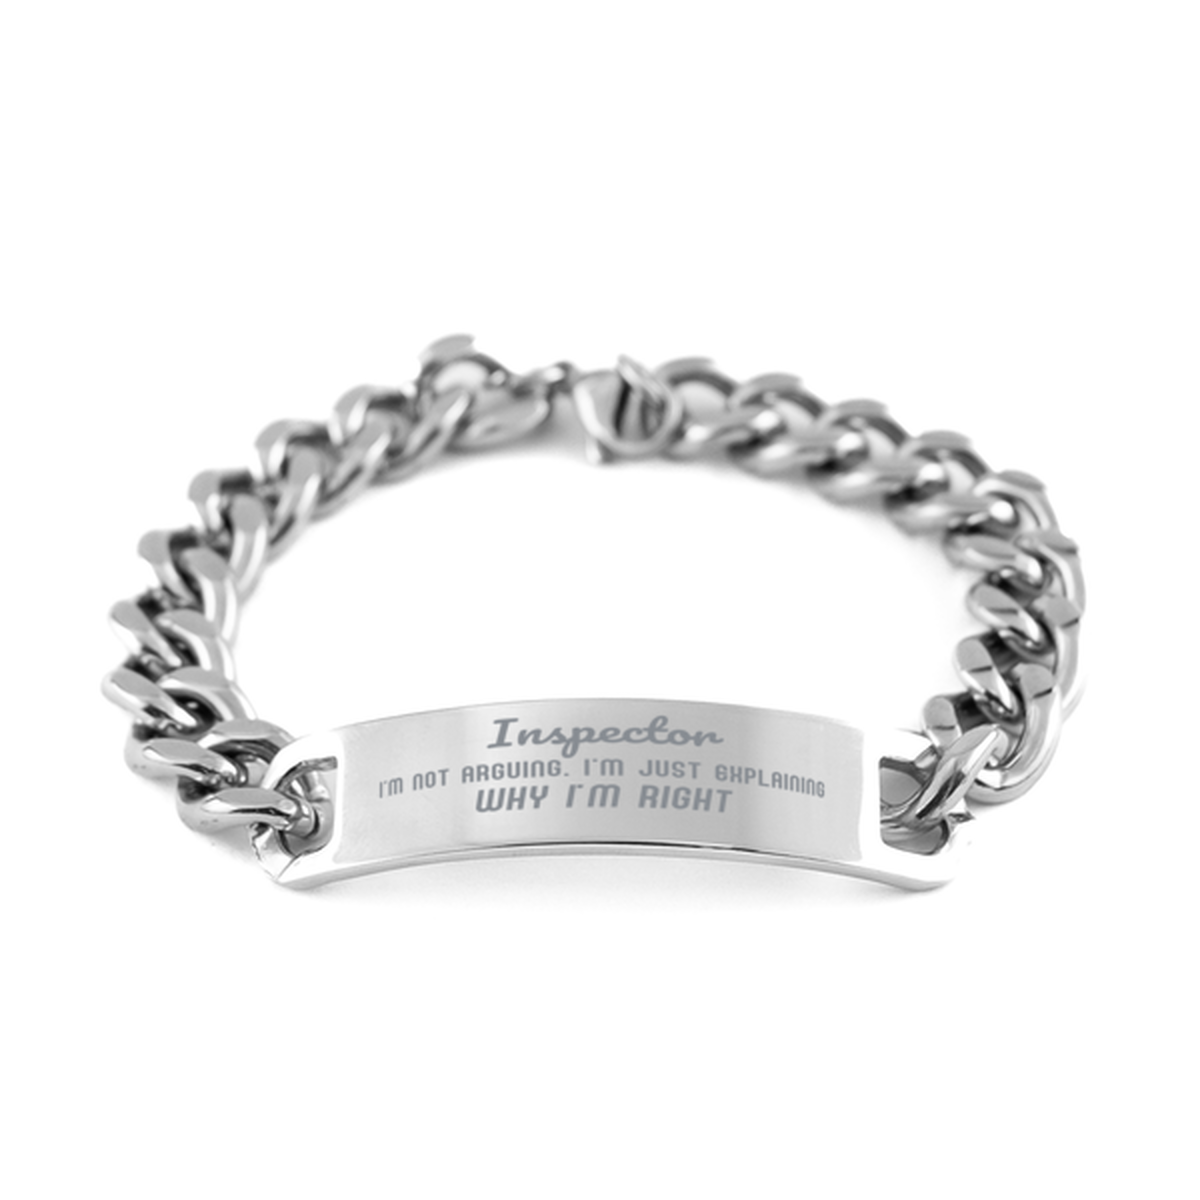 Inspector I'm not Arguing. I'm Just Explaining Why I'm RIGHT Cuban Chain Stainless Steel Bracelet, Graduation Birthday Christmas Inspector Gifts For Inspector Funny Saying Quote Present for Men Women Coworker